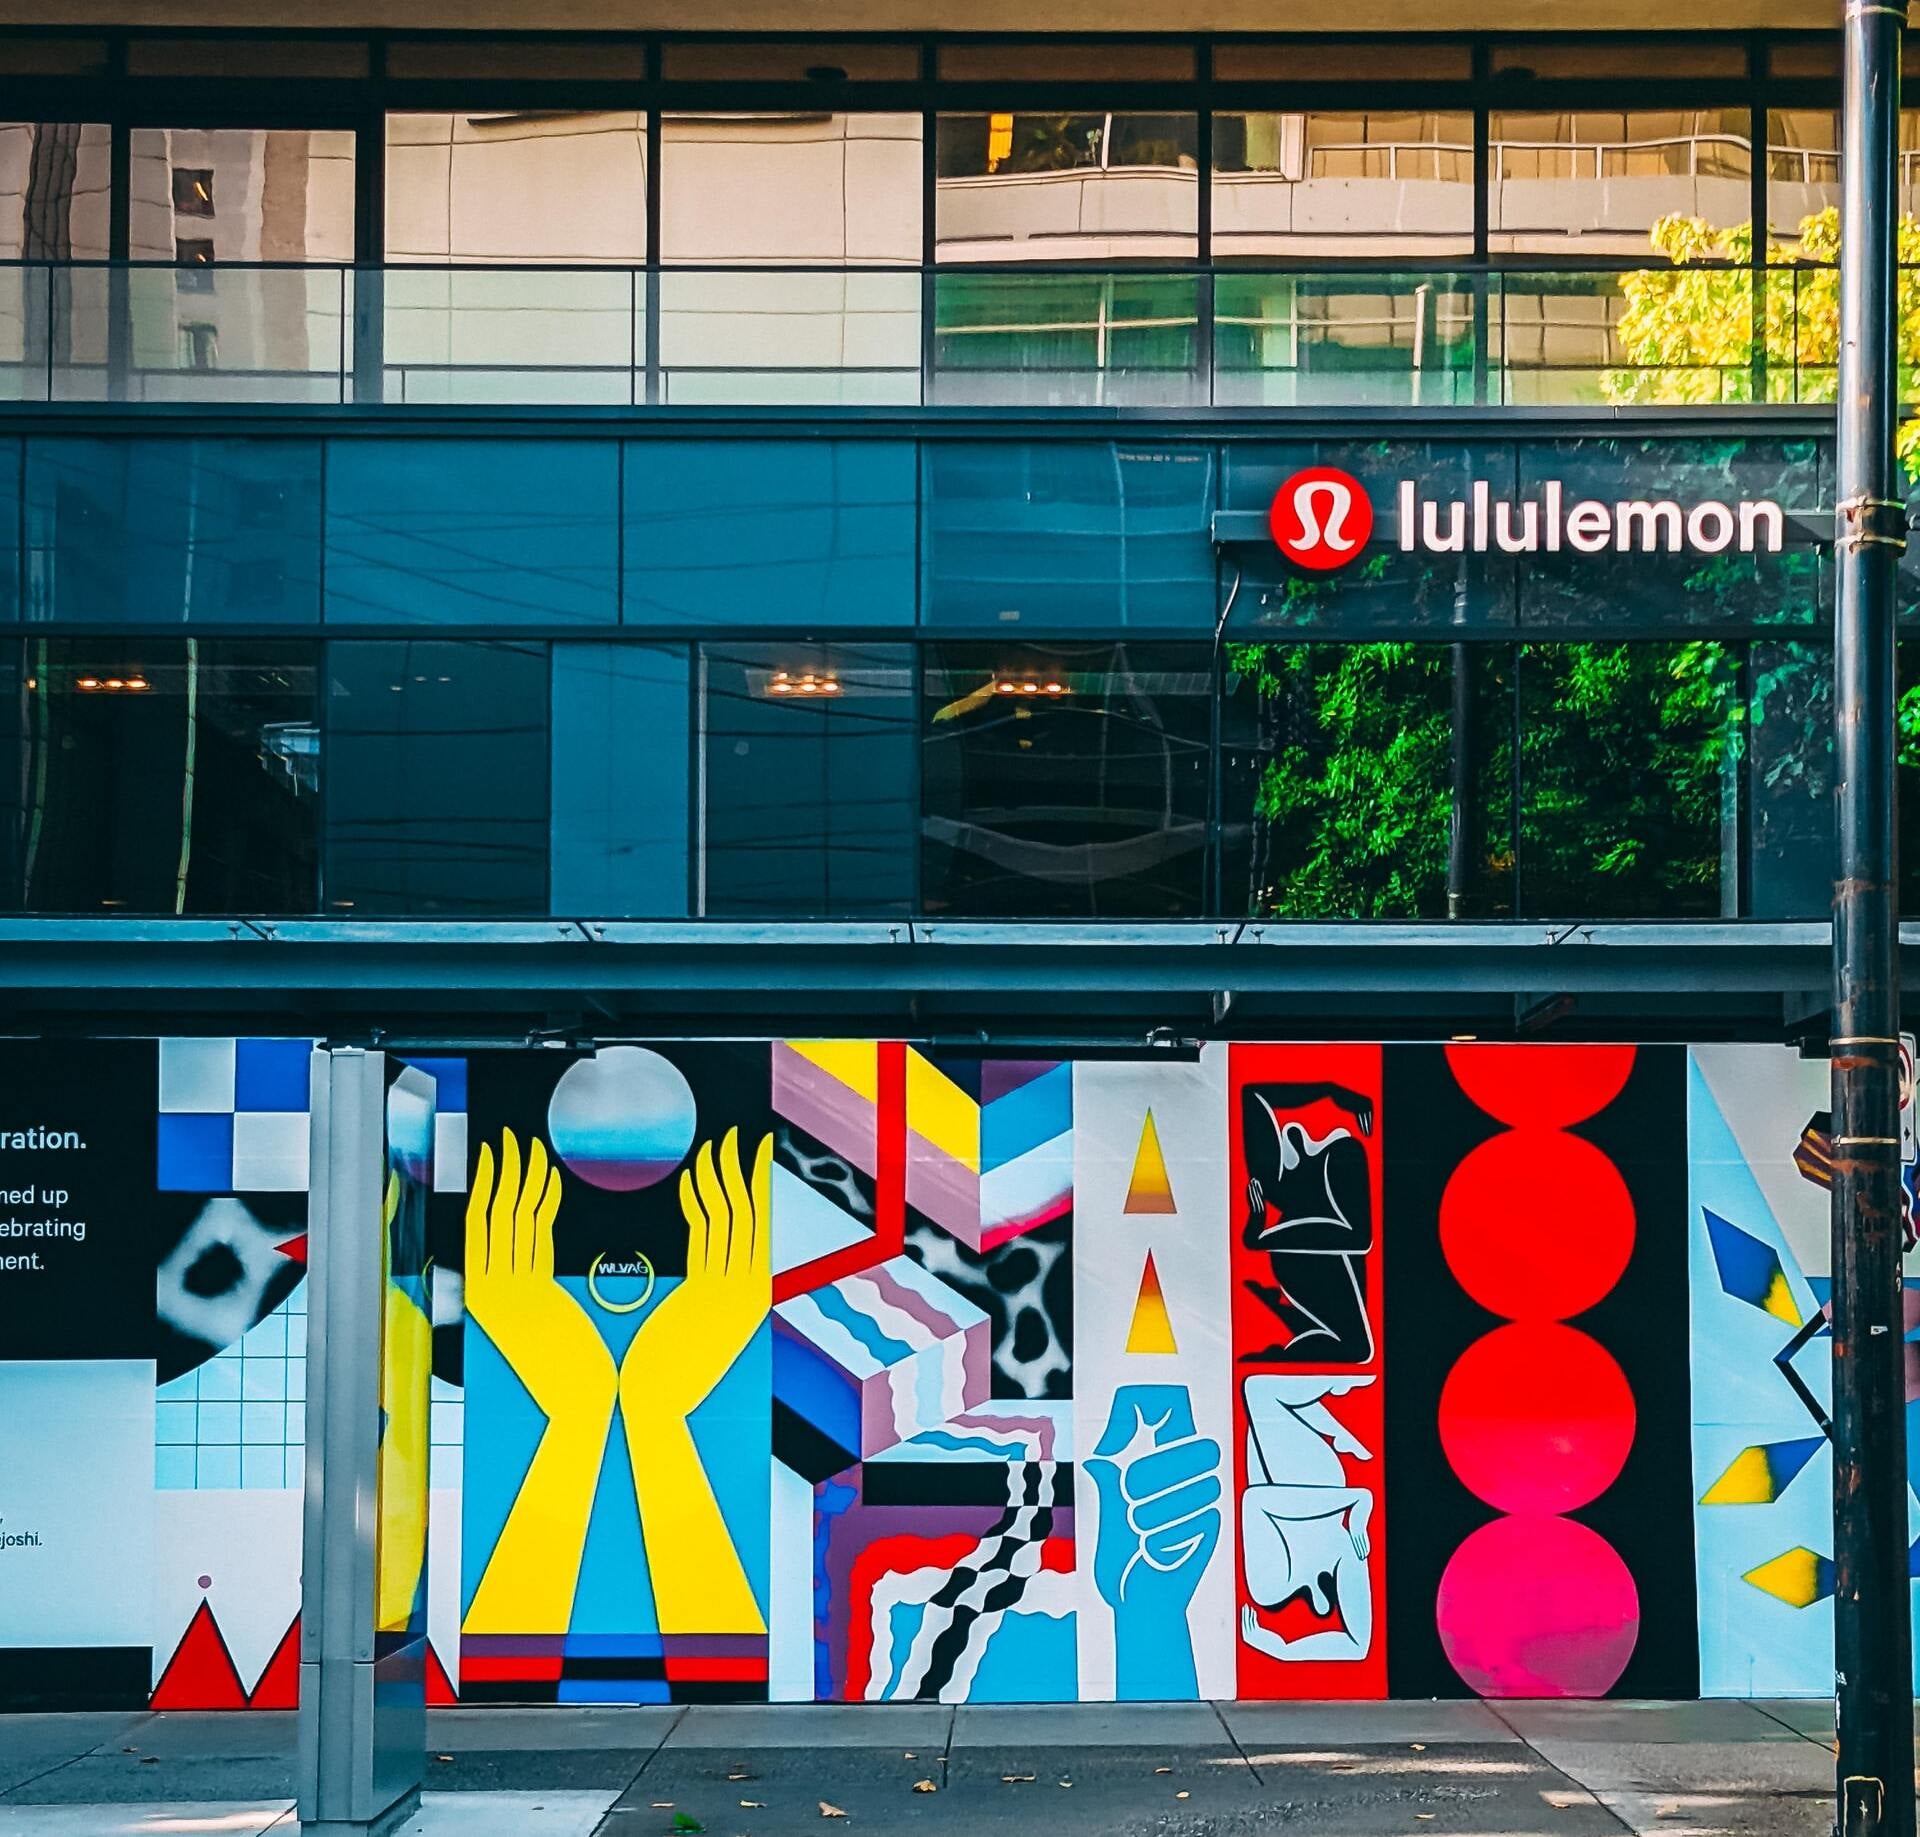 lululemon athletica to open its first two stores in Spain